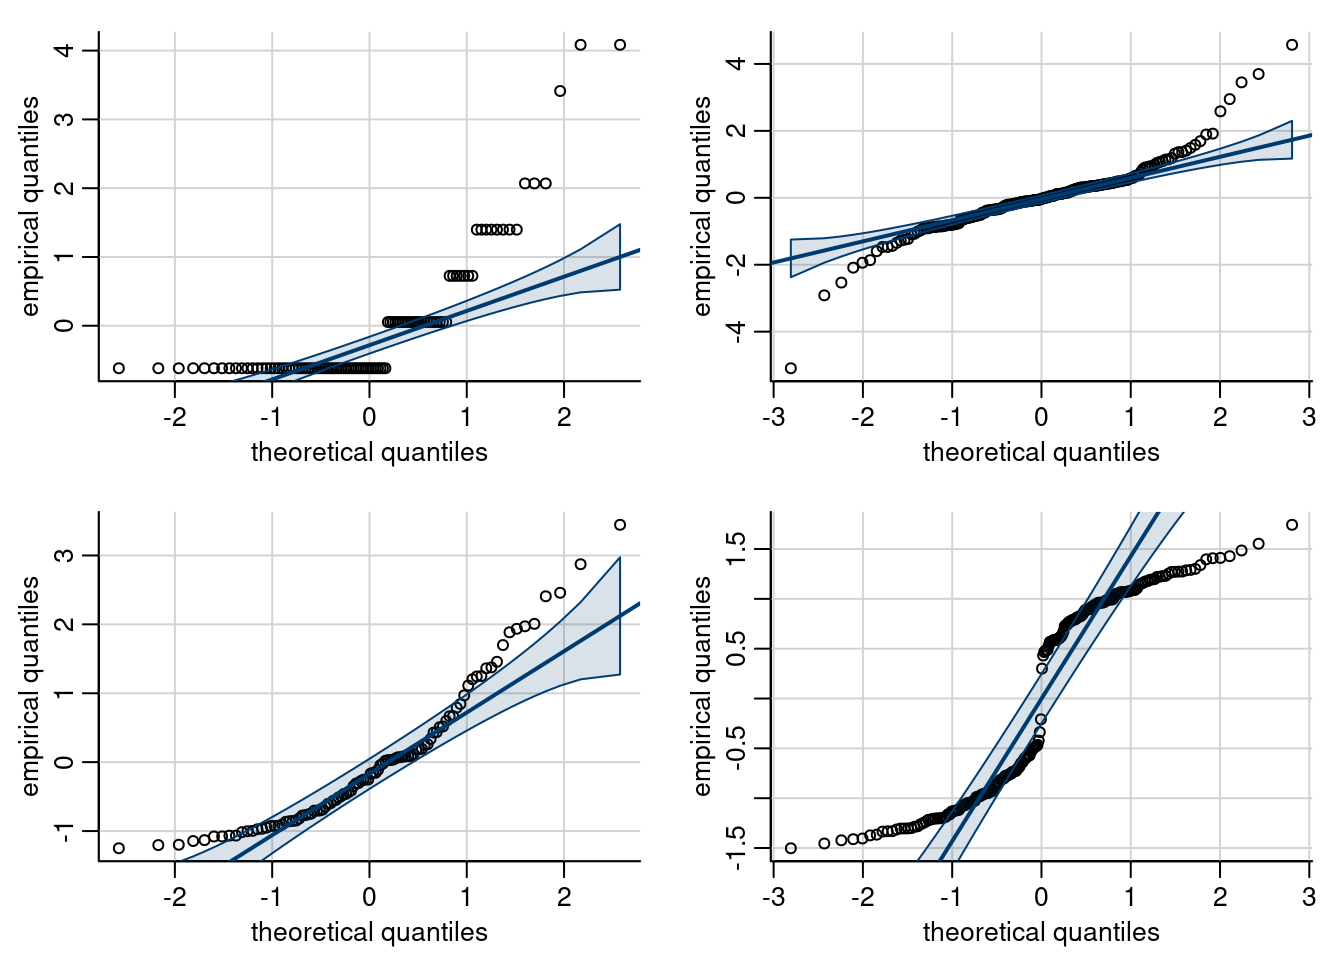 Quantile-quantile plots of non-normal data, showing typical look of behaviour of discrete (top left), heavy tailed  (top right), skewed (bottom left) and bimodal data (bottom right).